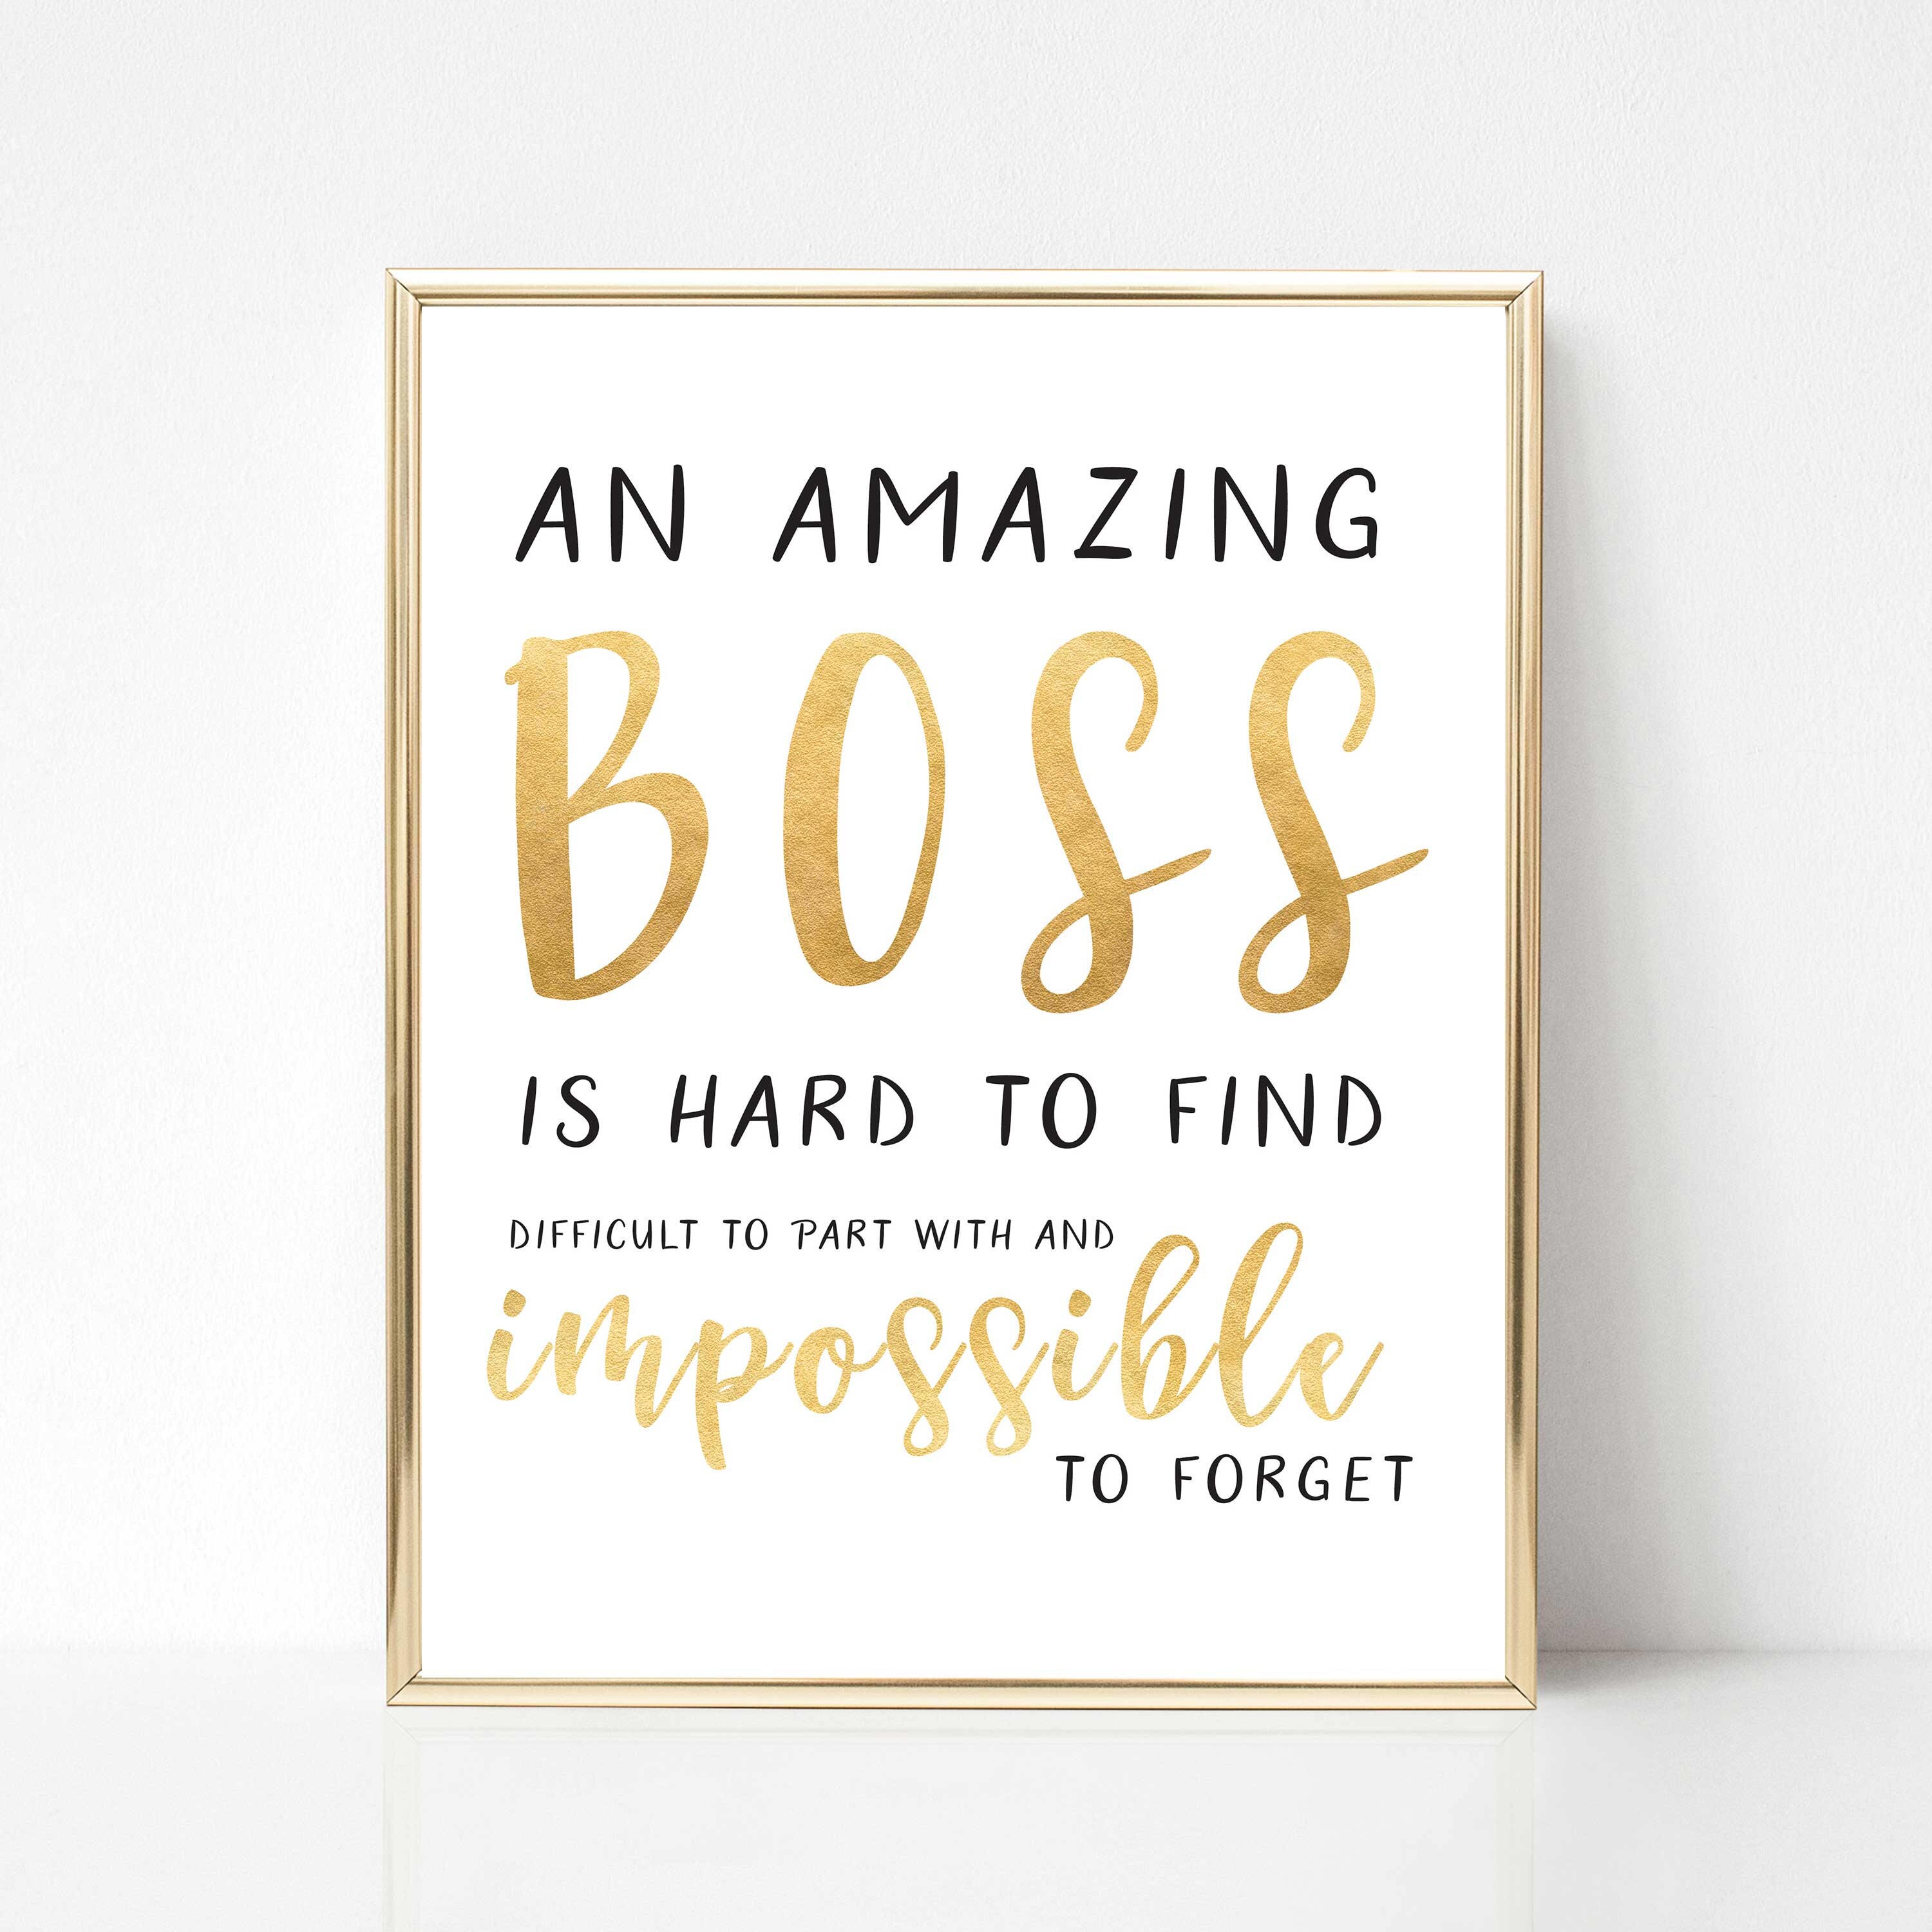 Top Boss Quotes : 35 Appreciation Quotes for Boss/Managers - The best